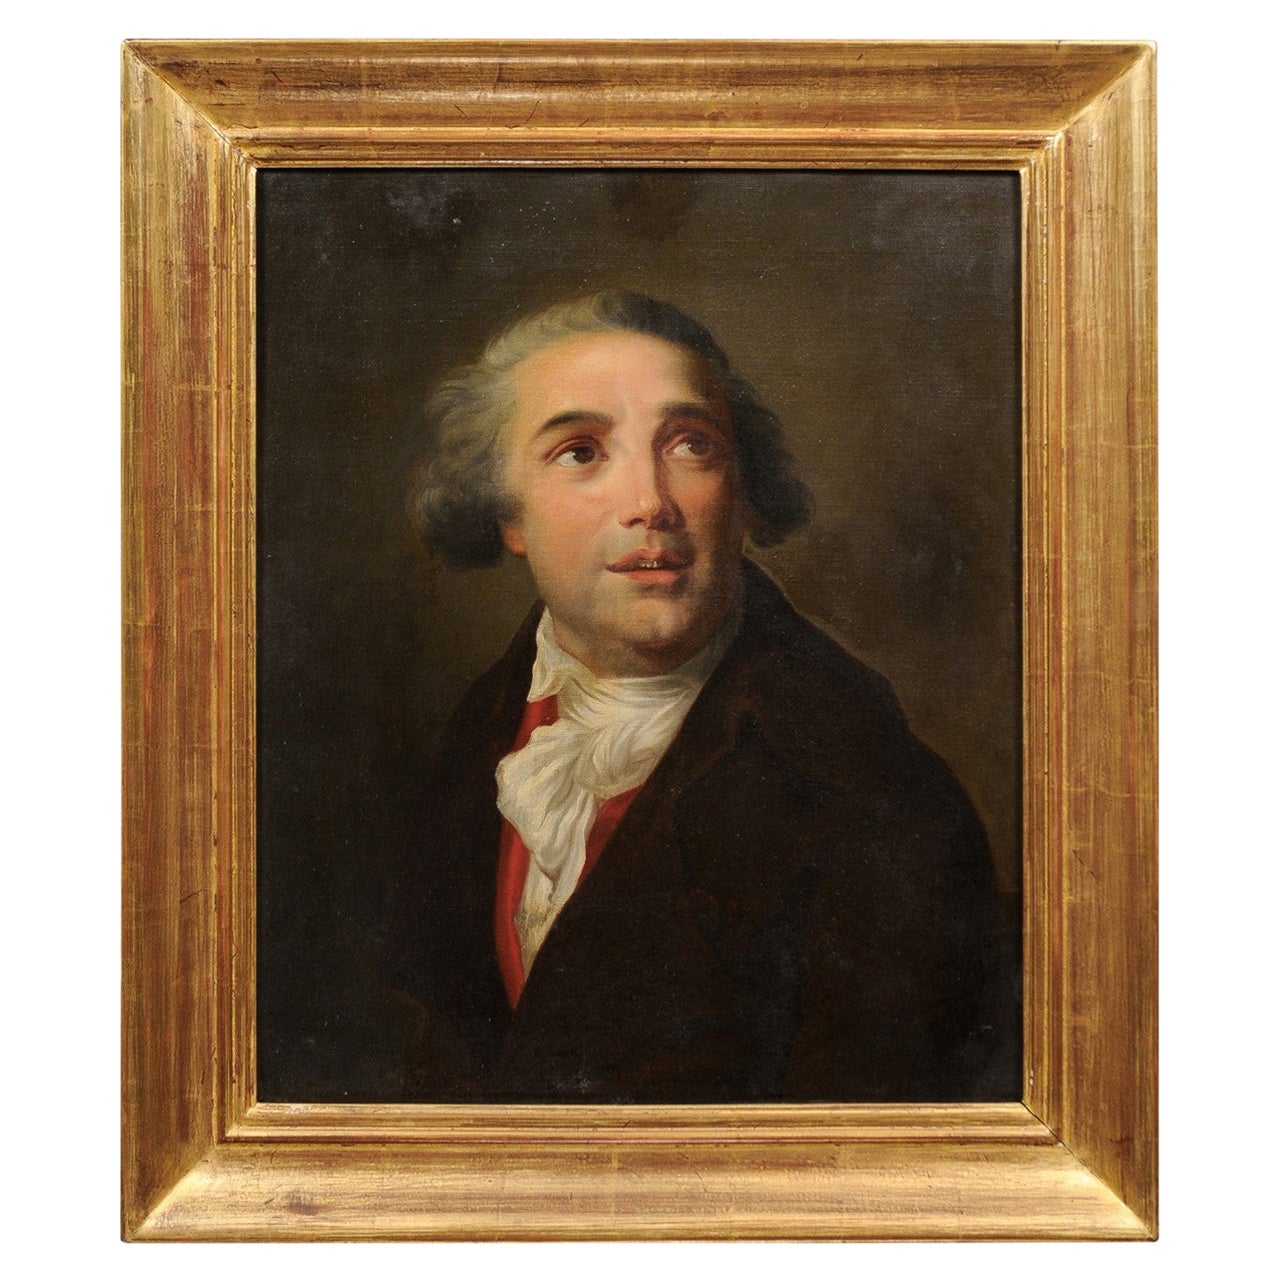 Giltwood Framed Oil on Canvas Portrait of a Gentleman, 19th Century